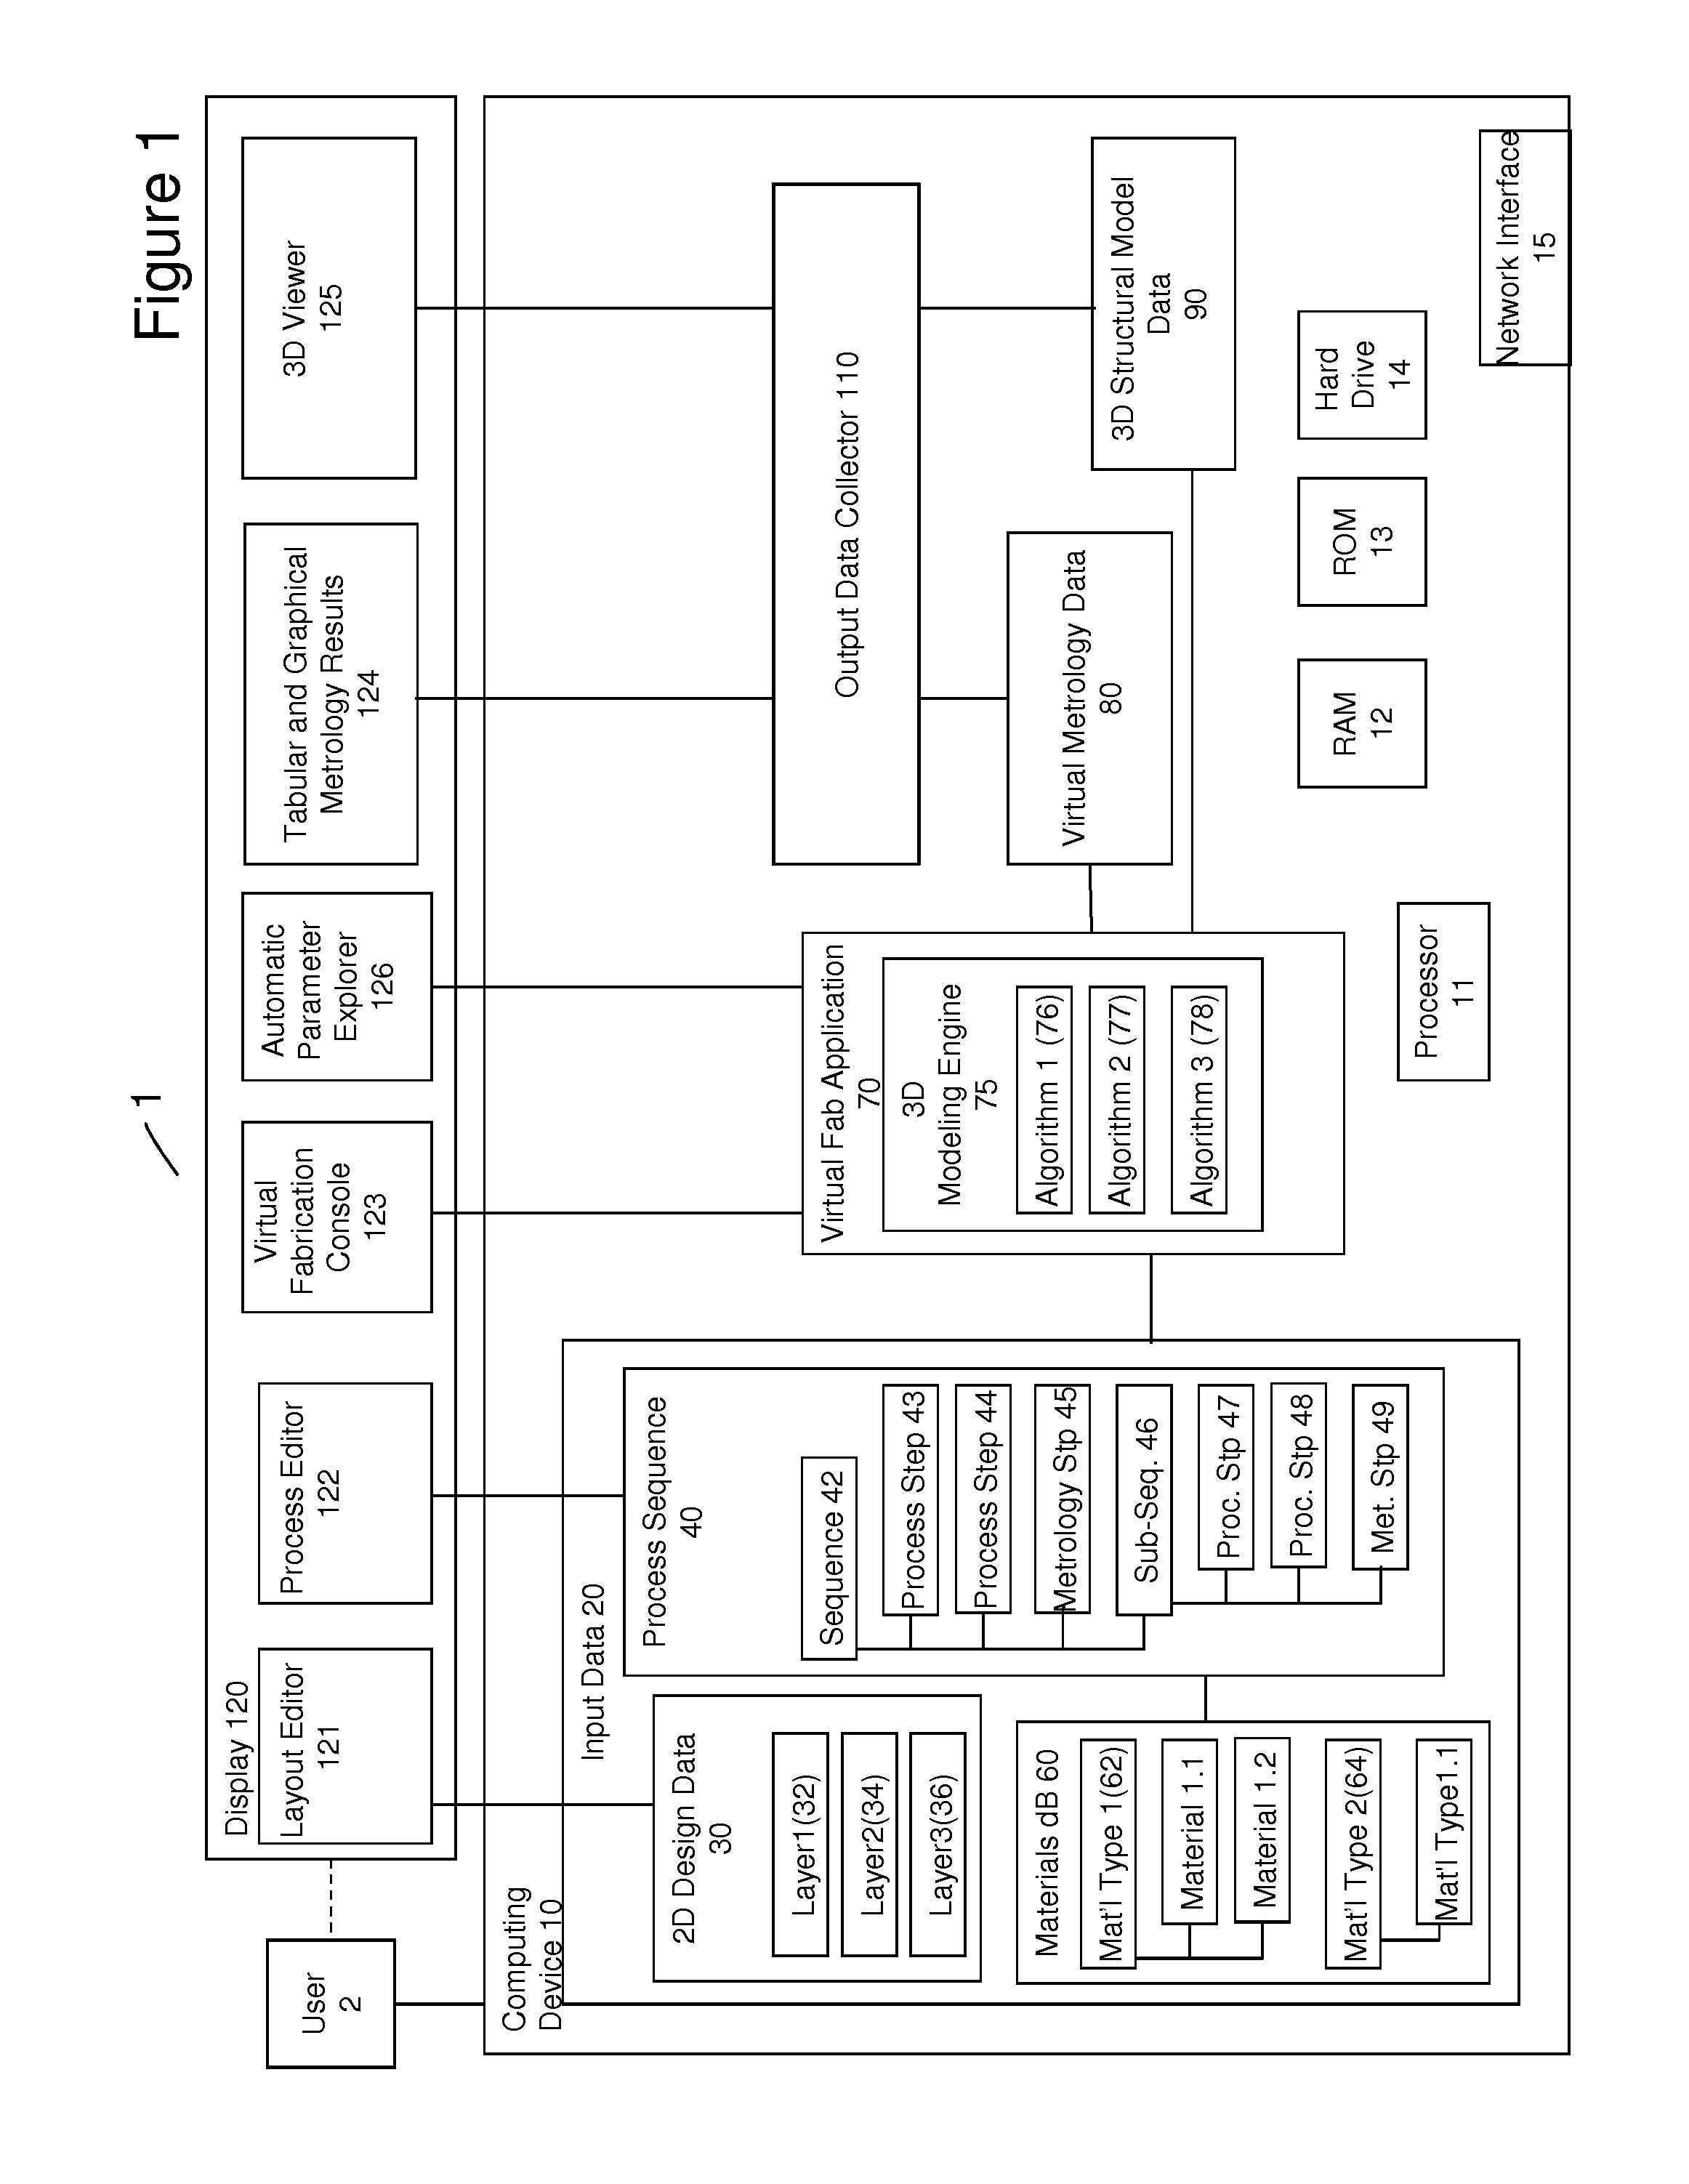 Predictive 3-d virtual fabrication system and method